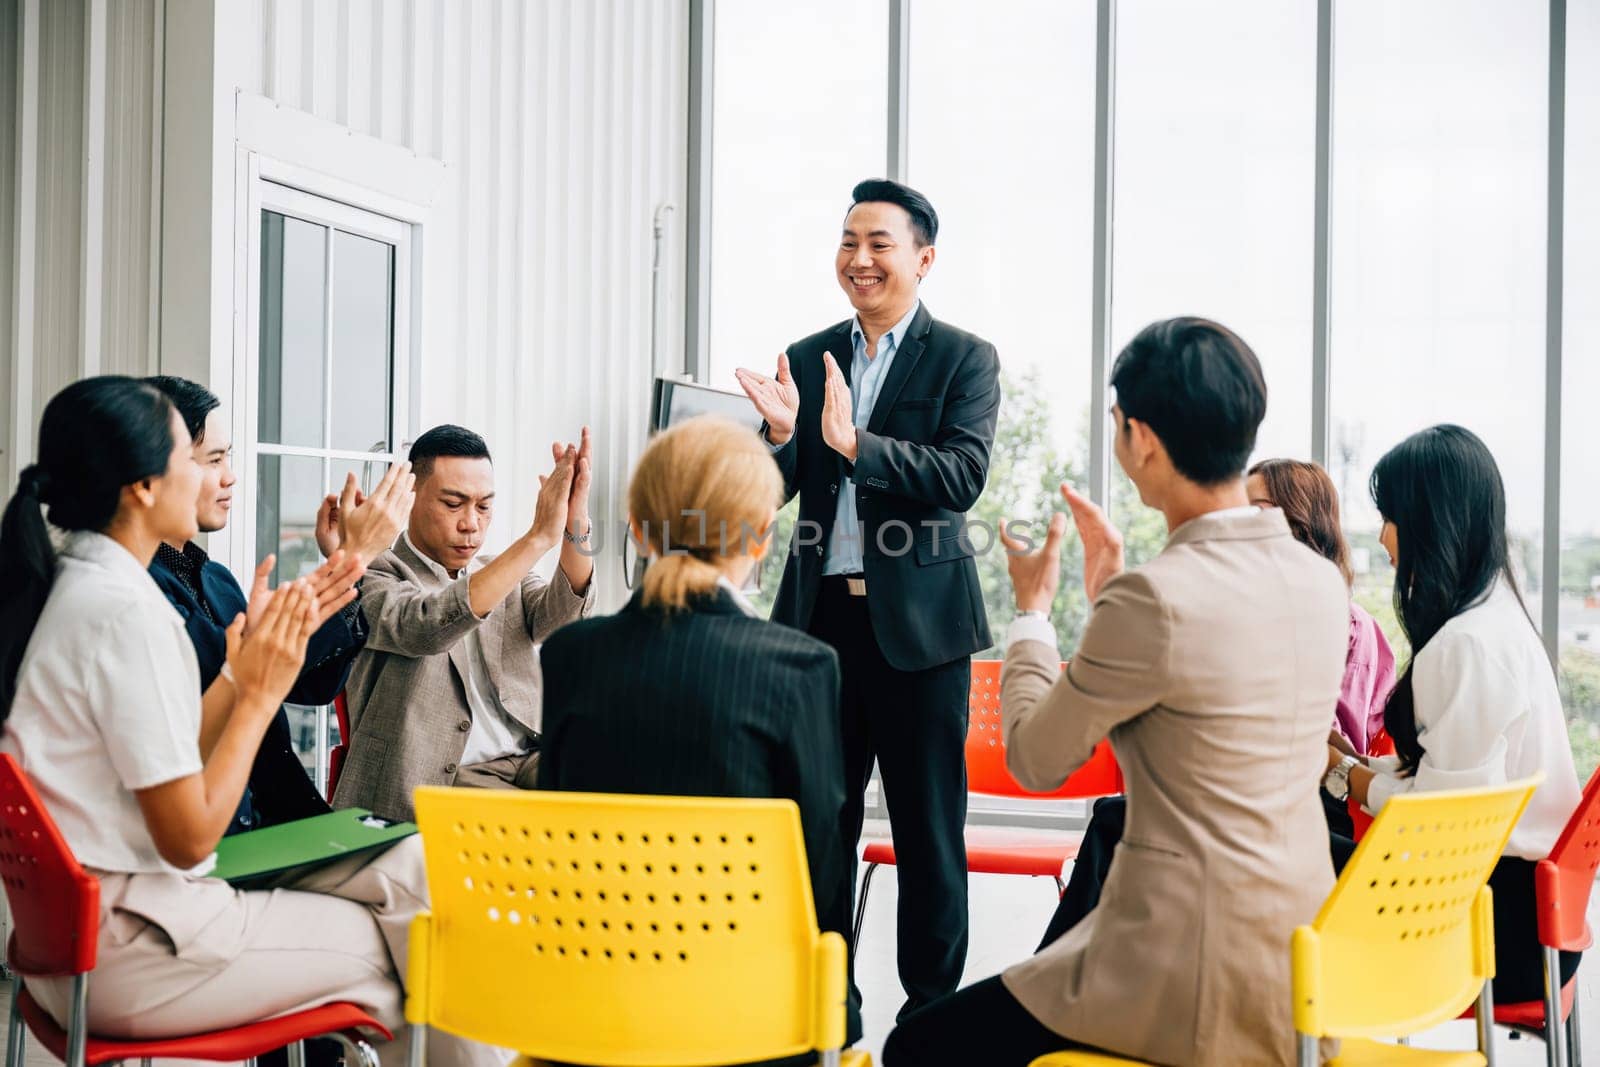 Asian man presents his work in meeting room receiving praise and compliments from colleagues. The audience claps with happiness celebrating his achievement. It signifies teamwork and business success.